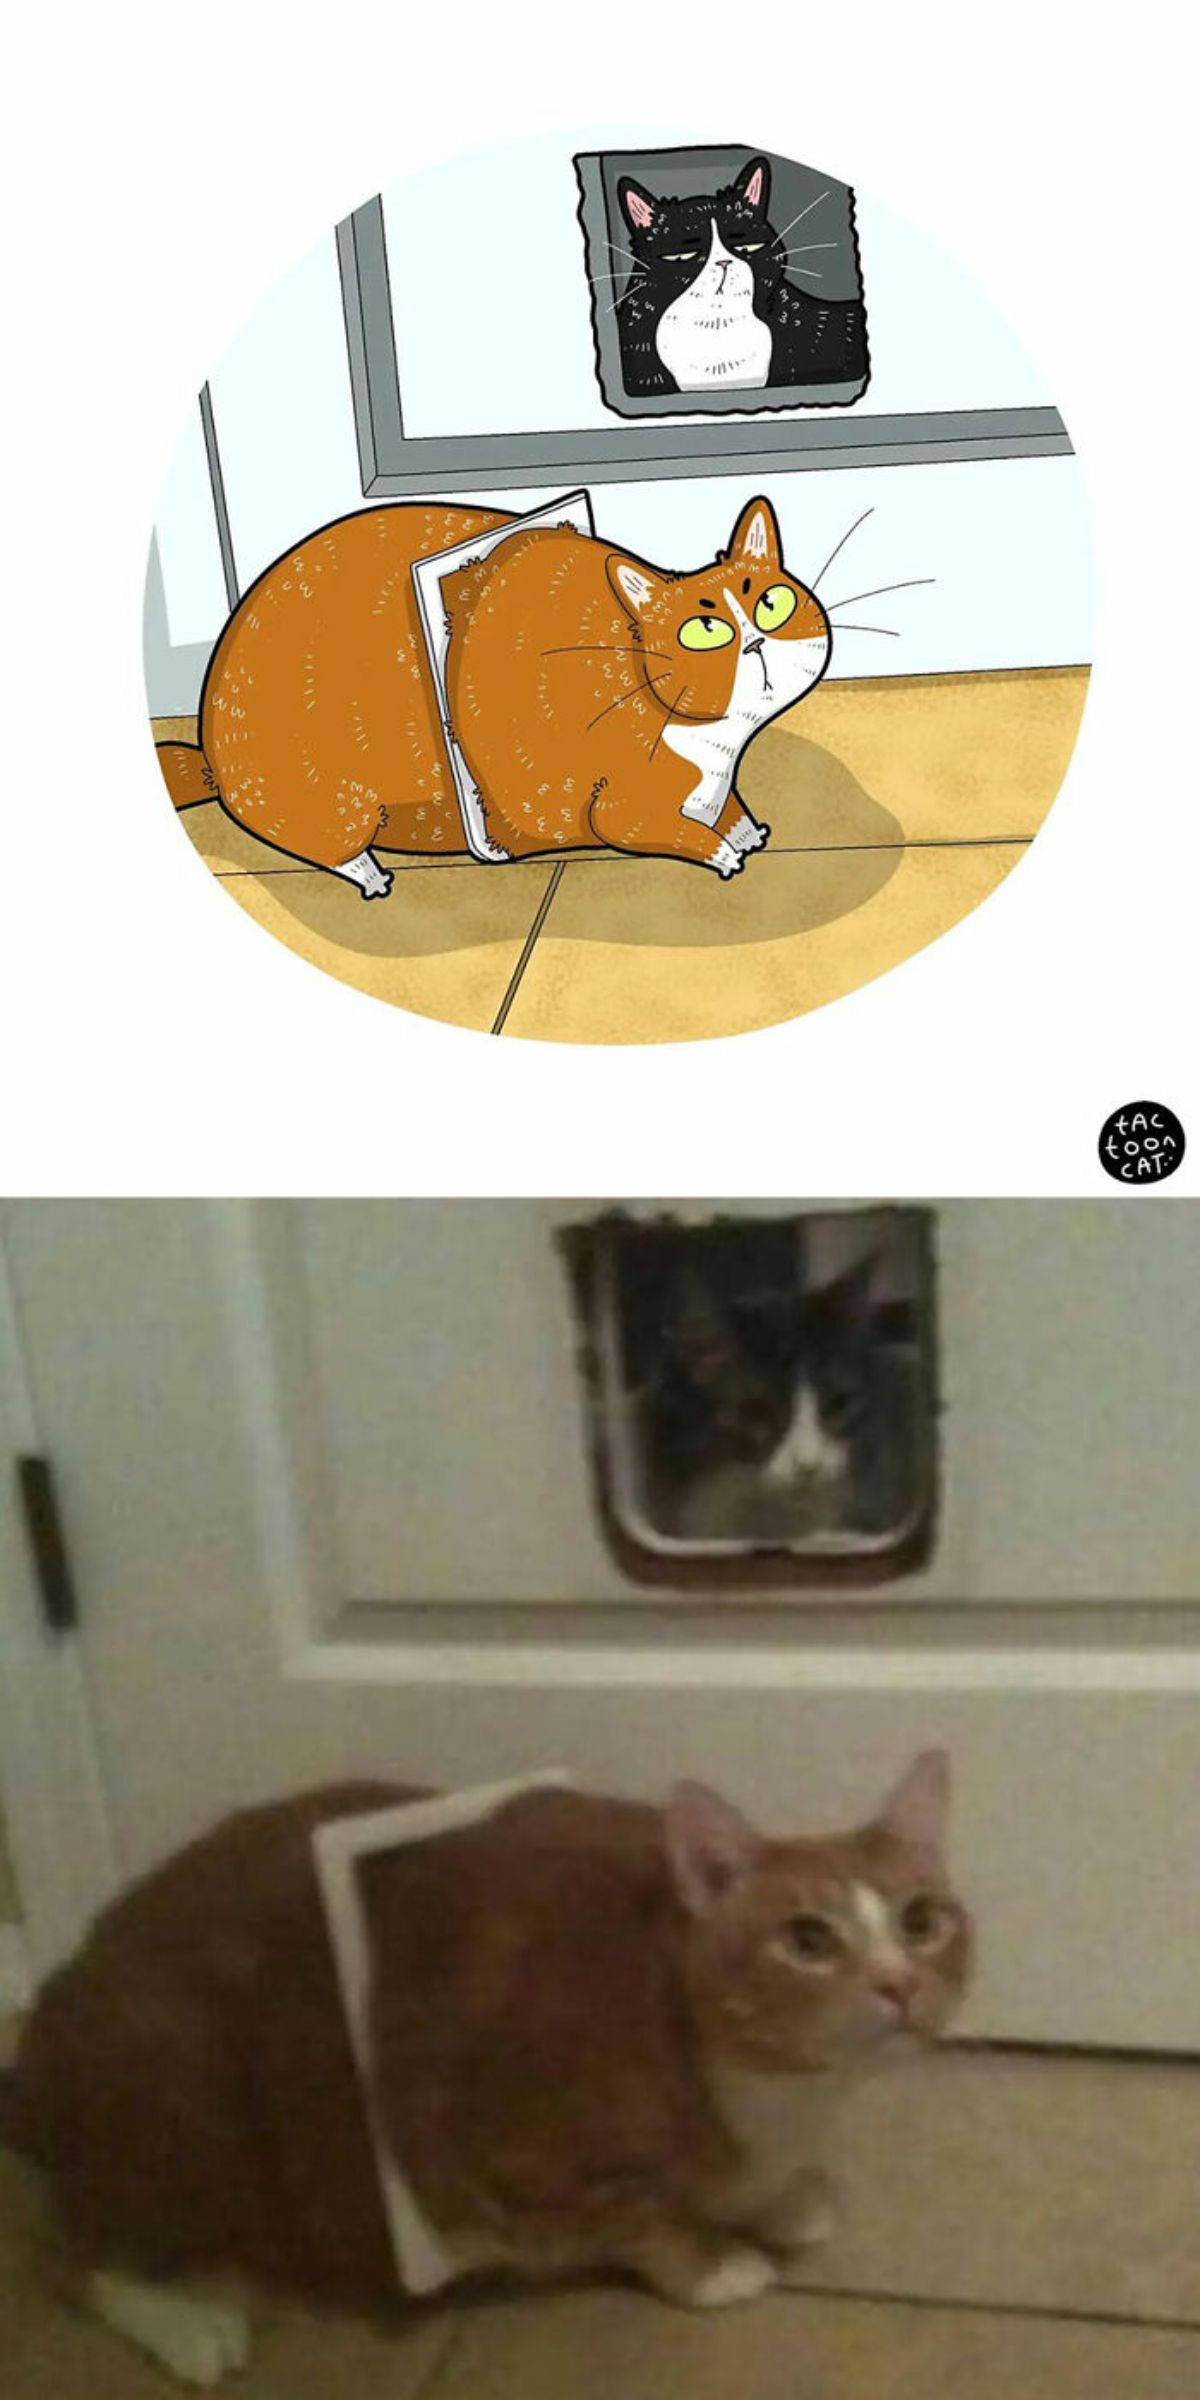 cartoon photo and real photo of a grey and white cat looking through a cat door in a door and an orange cat sitting on the opposite side of the door with the frame of the cat door stuck around it